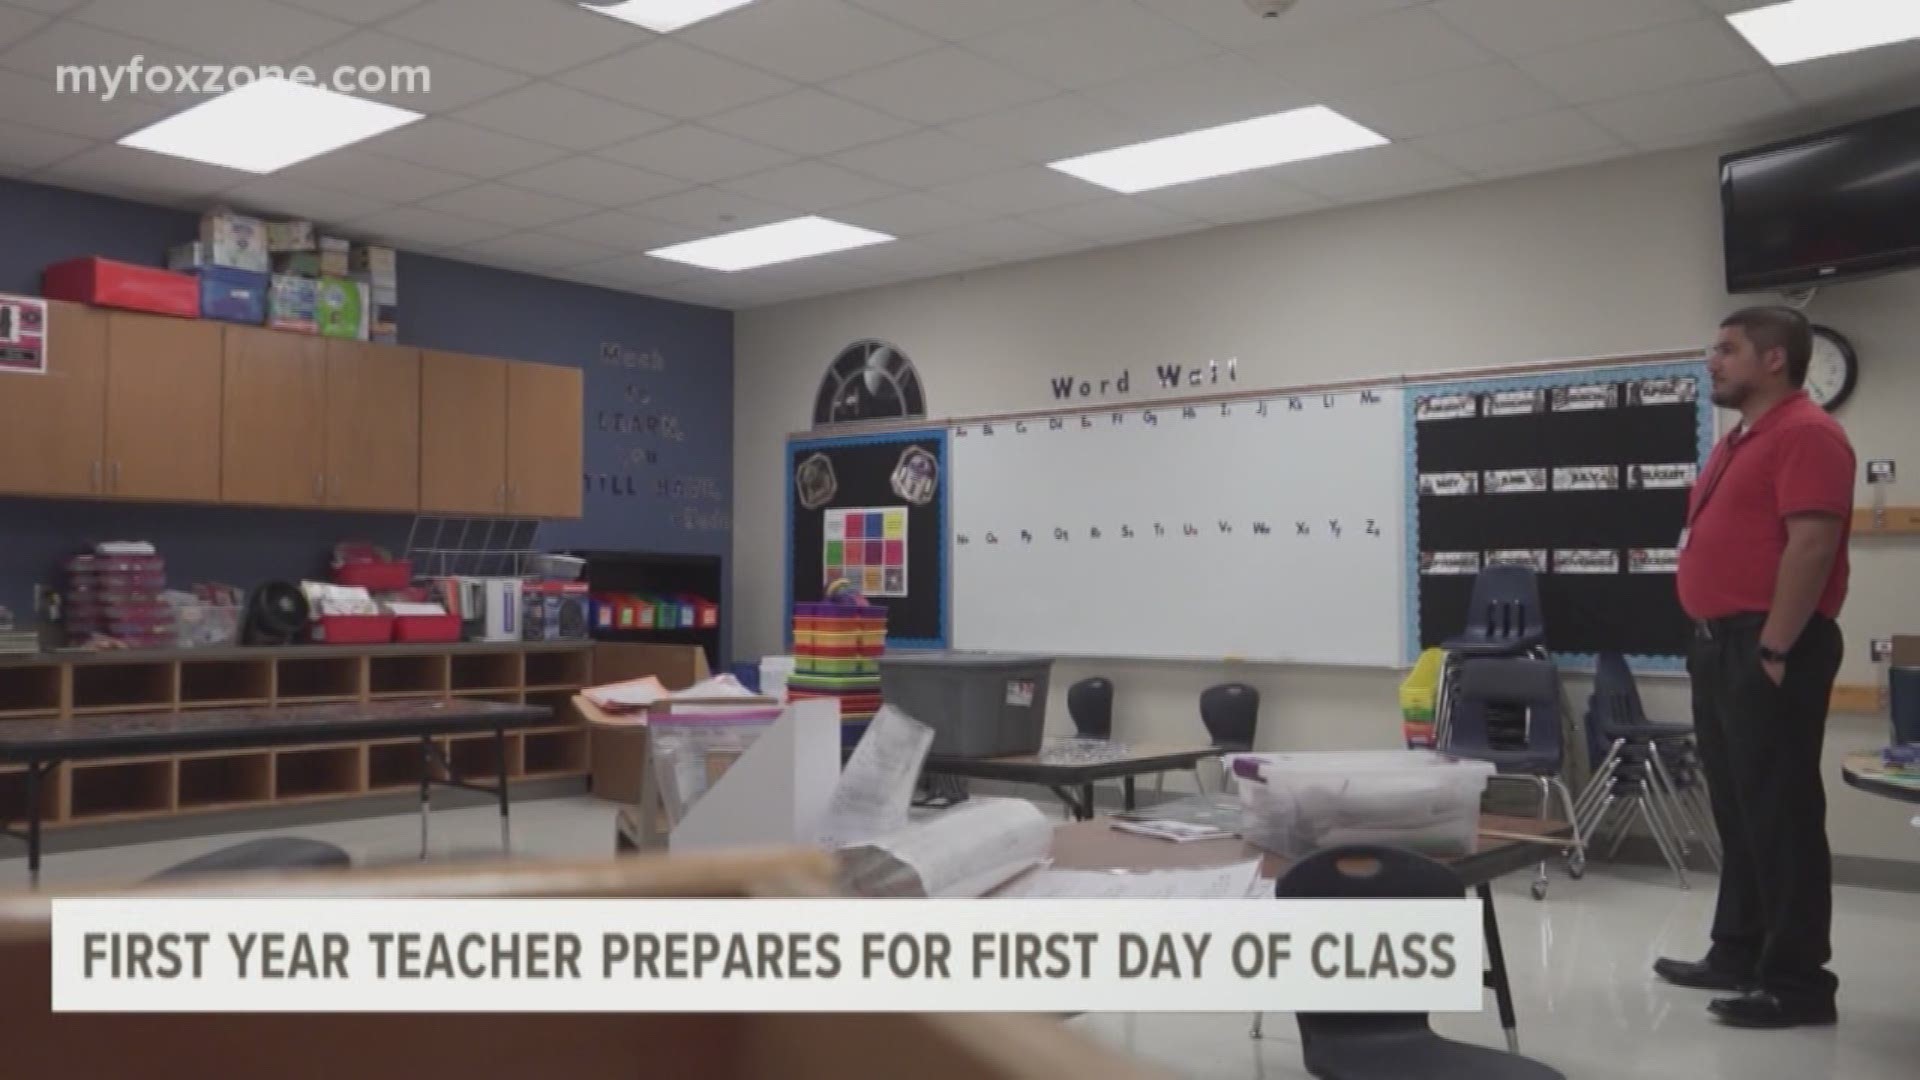 The first day of school for students can be exciting and nerve racking. That also goes for first year teachers. One San Angelo I.S.D. teacher speaks about preparing for his first day in the classroom.